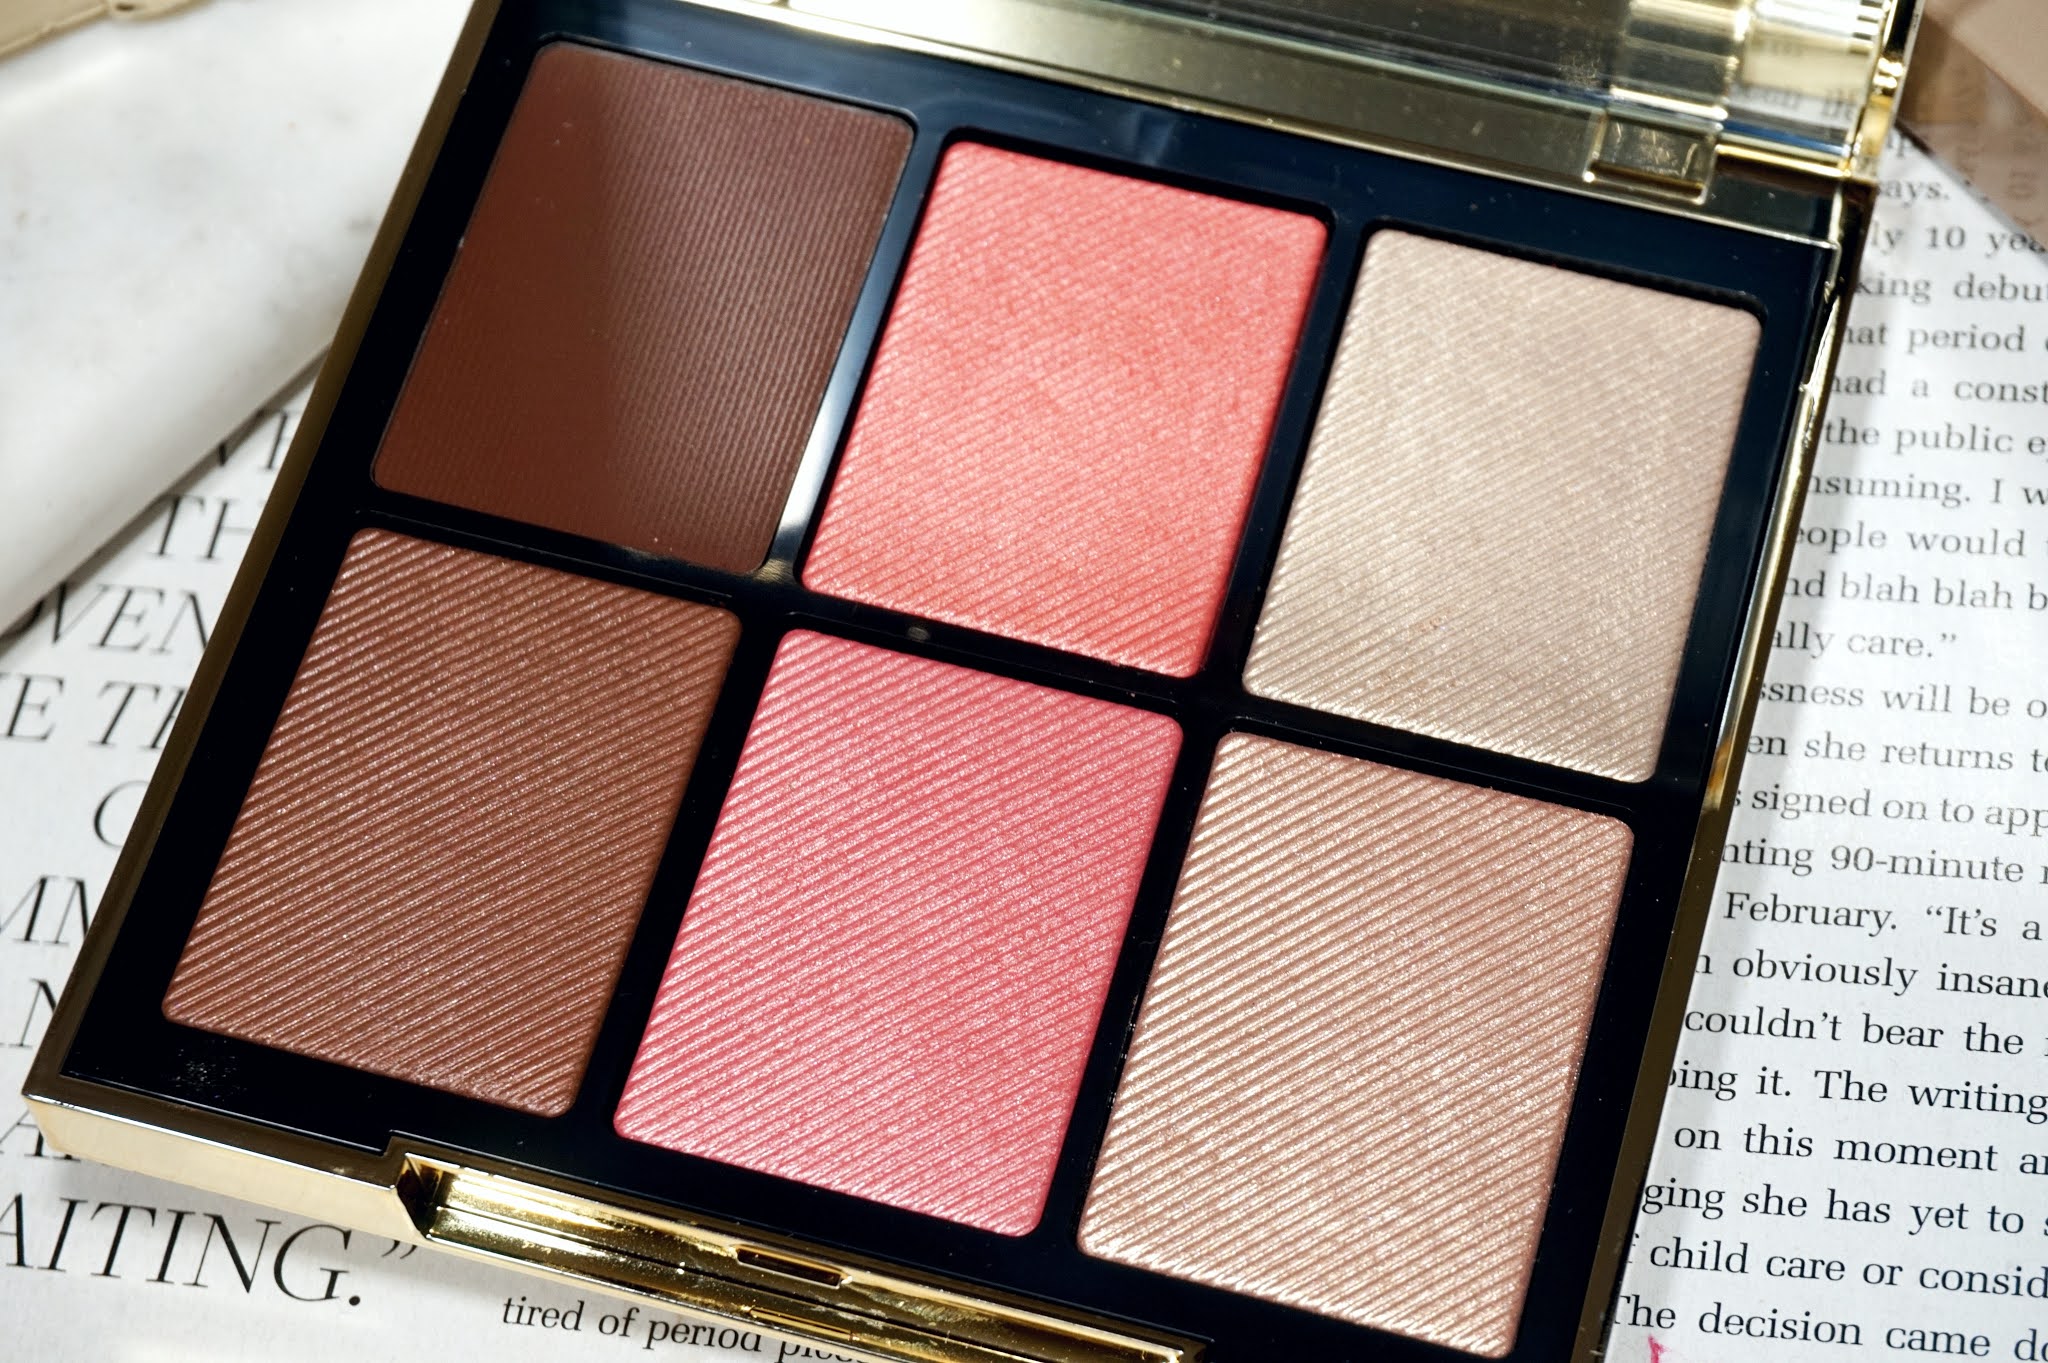 Burberry Essentials Glow Palette - 02 Medium to Dark Review and Swatches